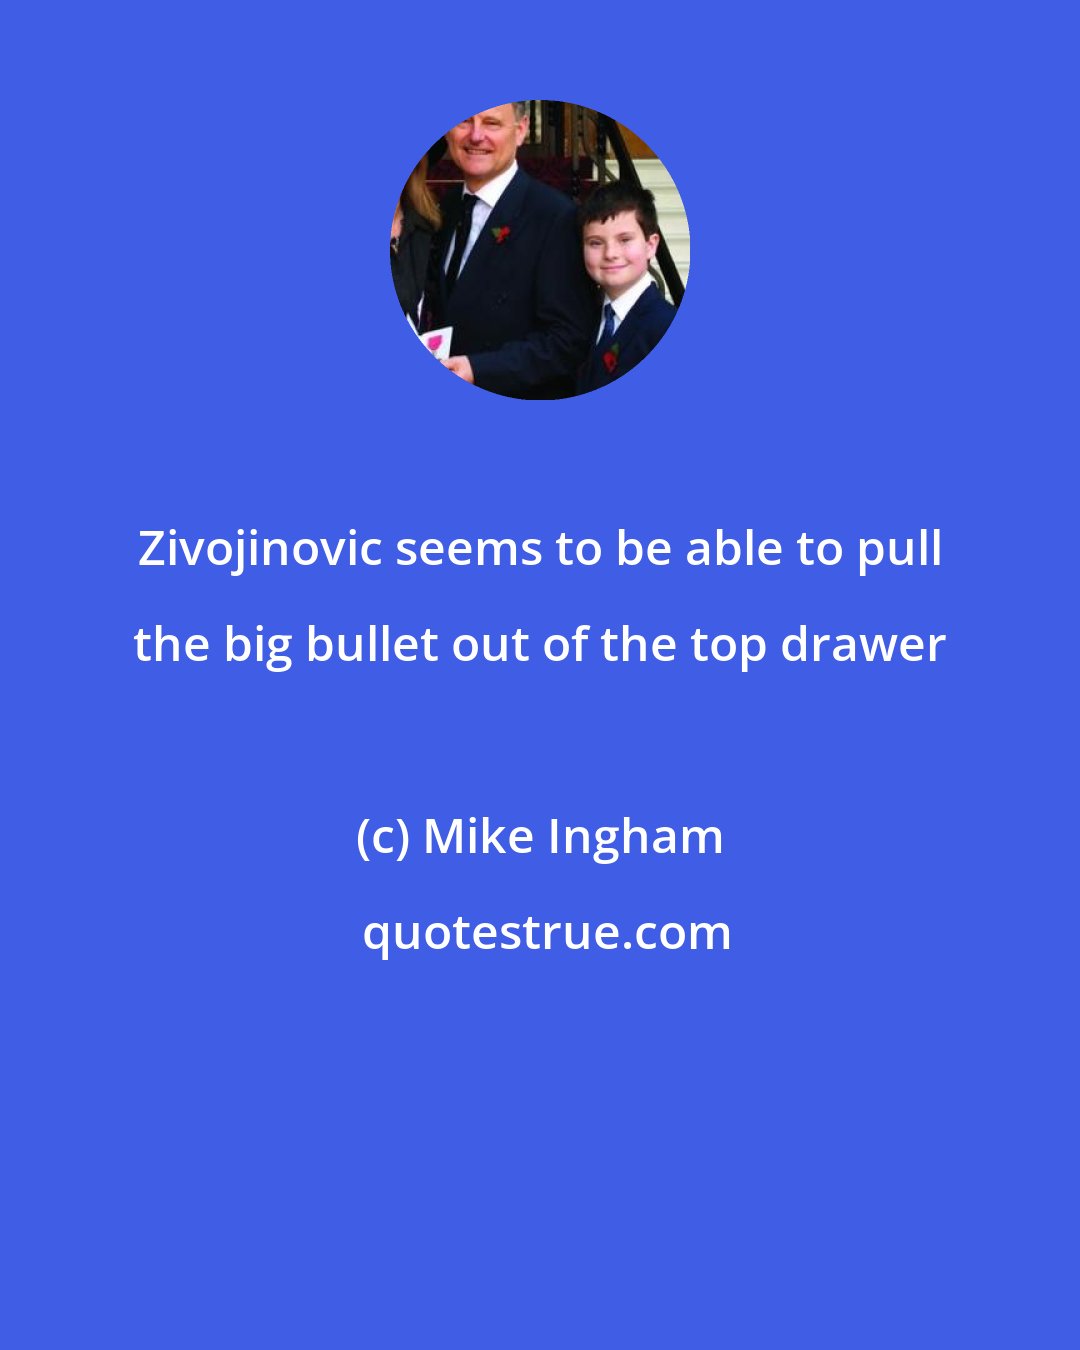 Mike Ingham: Zivojinovic seems to be able to pull the big bullet out of the top drawer